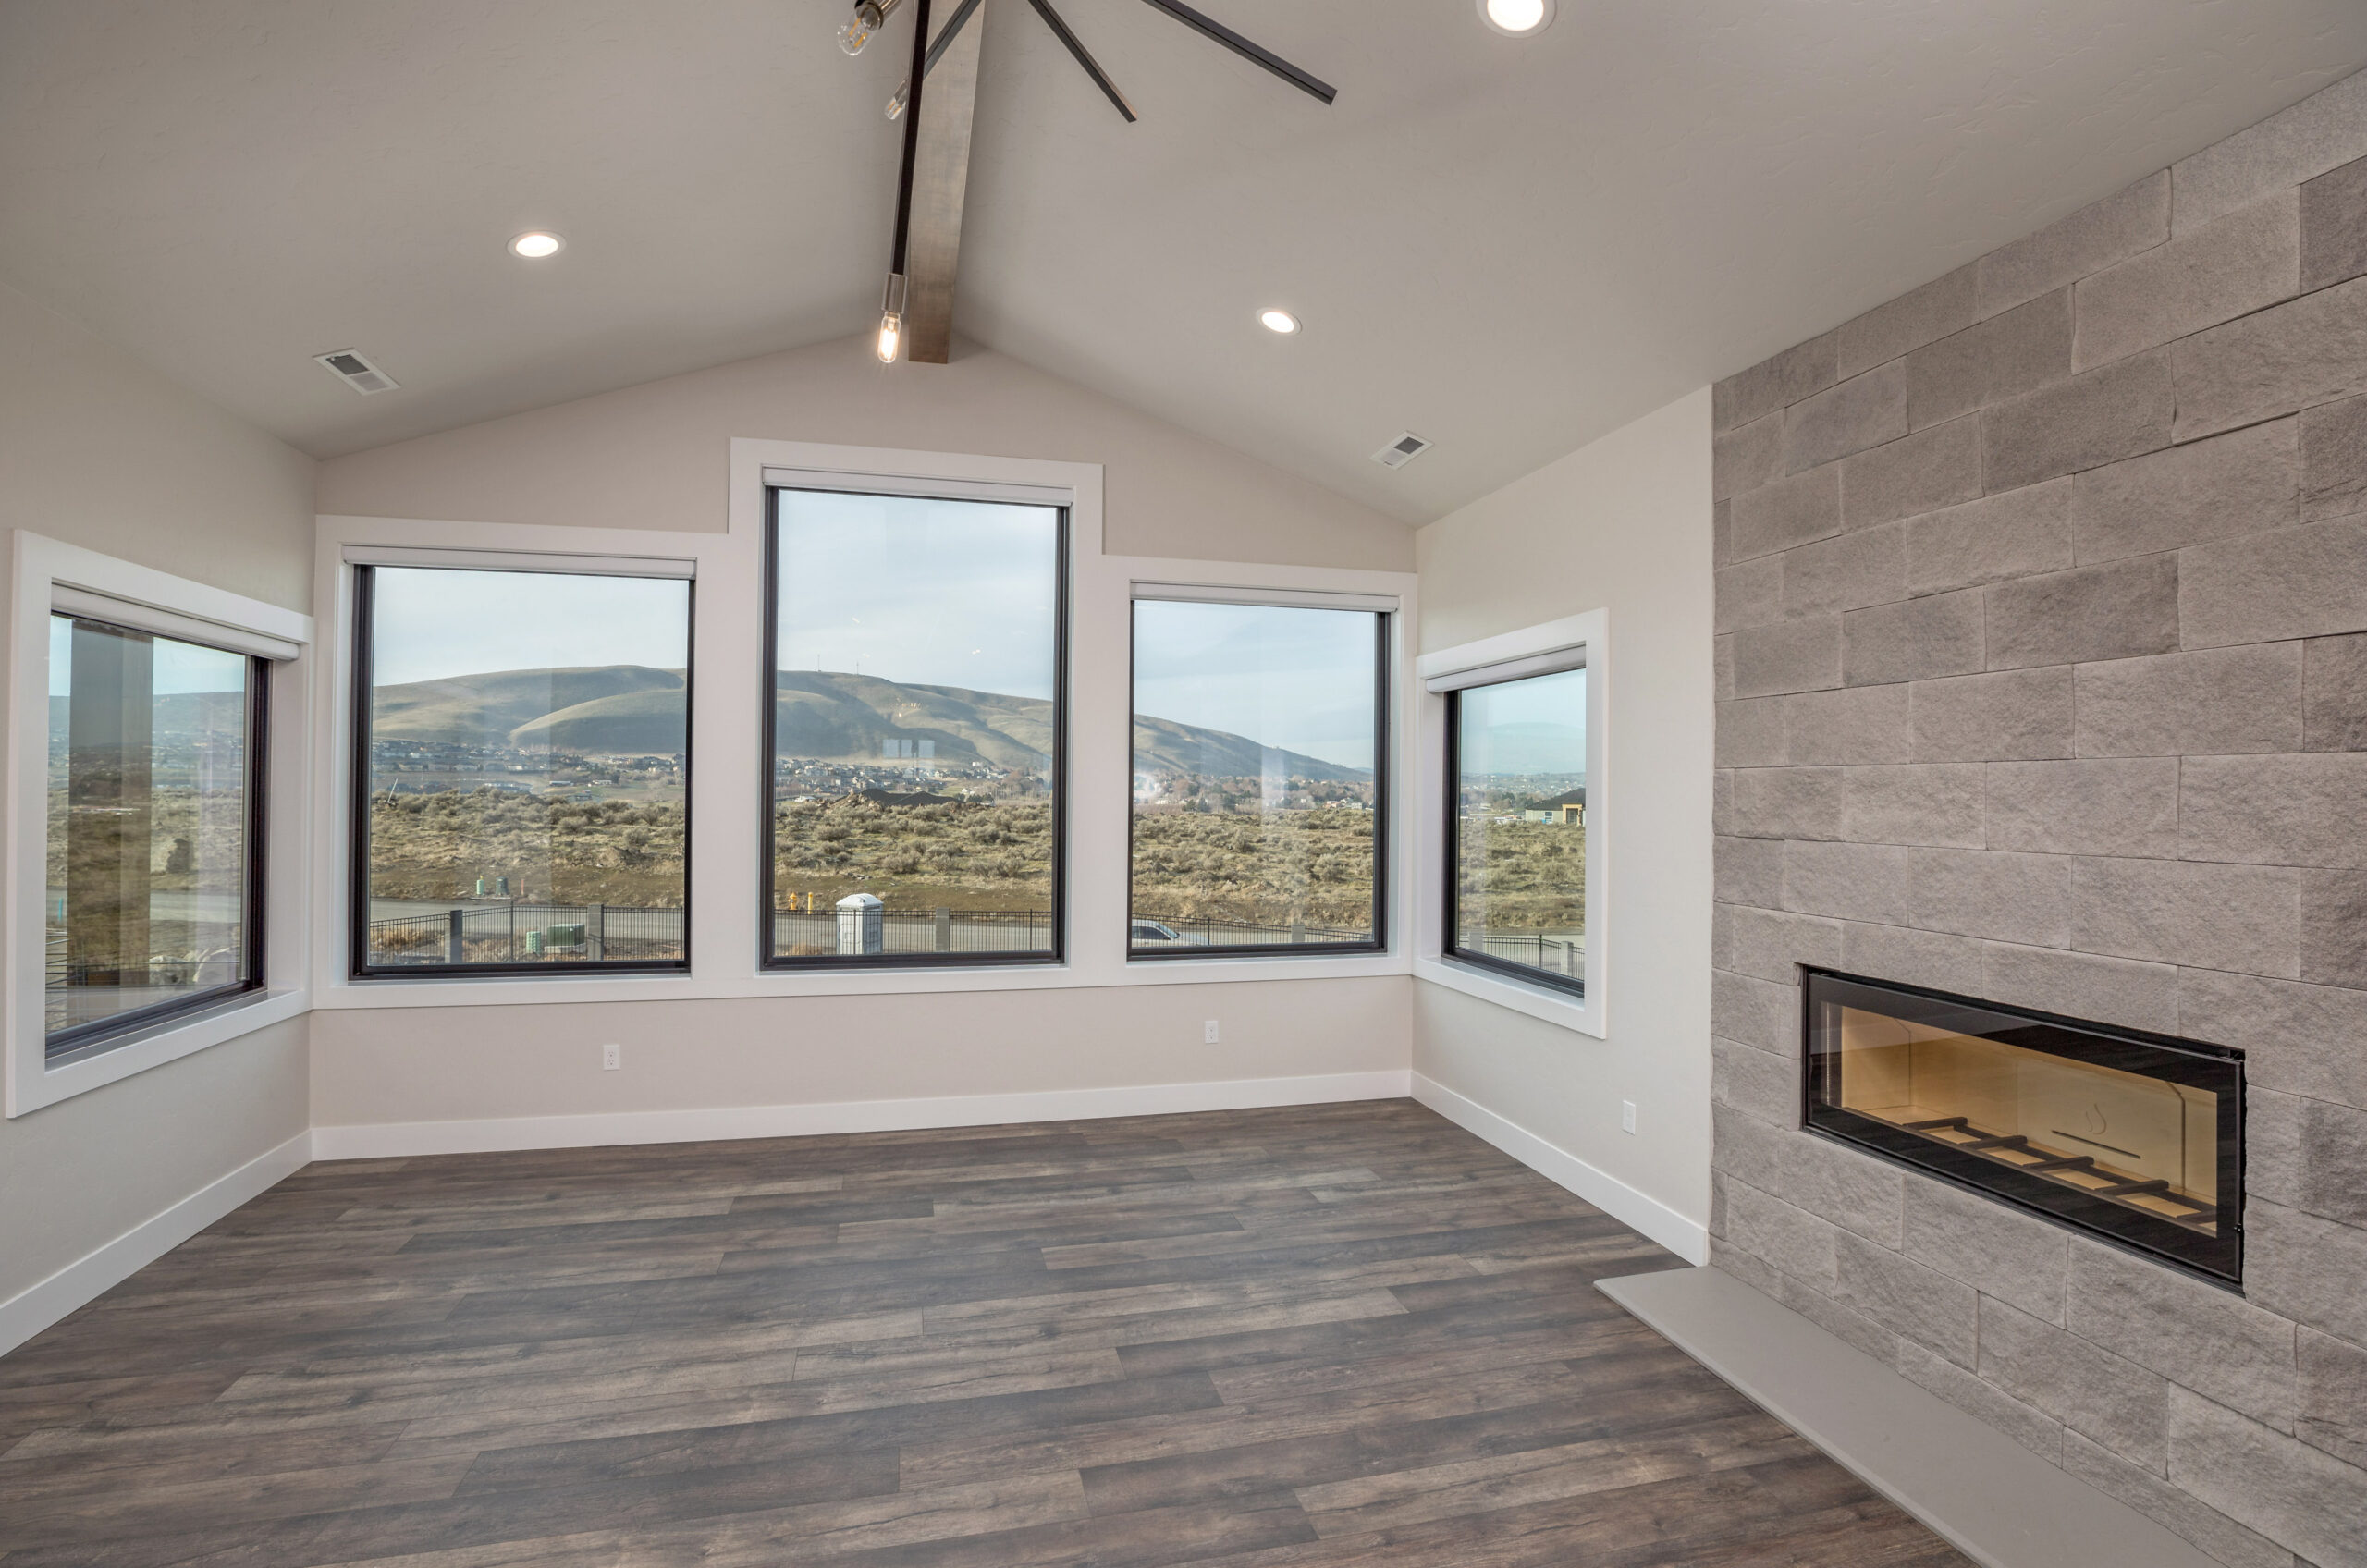 Modern empty family room design with fire place and lot of windows facing a scenic backyard.